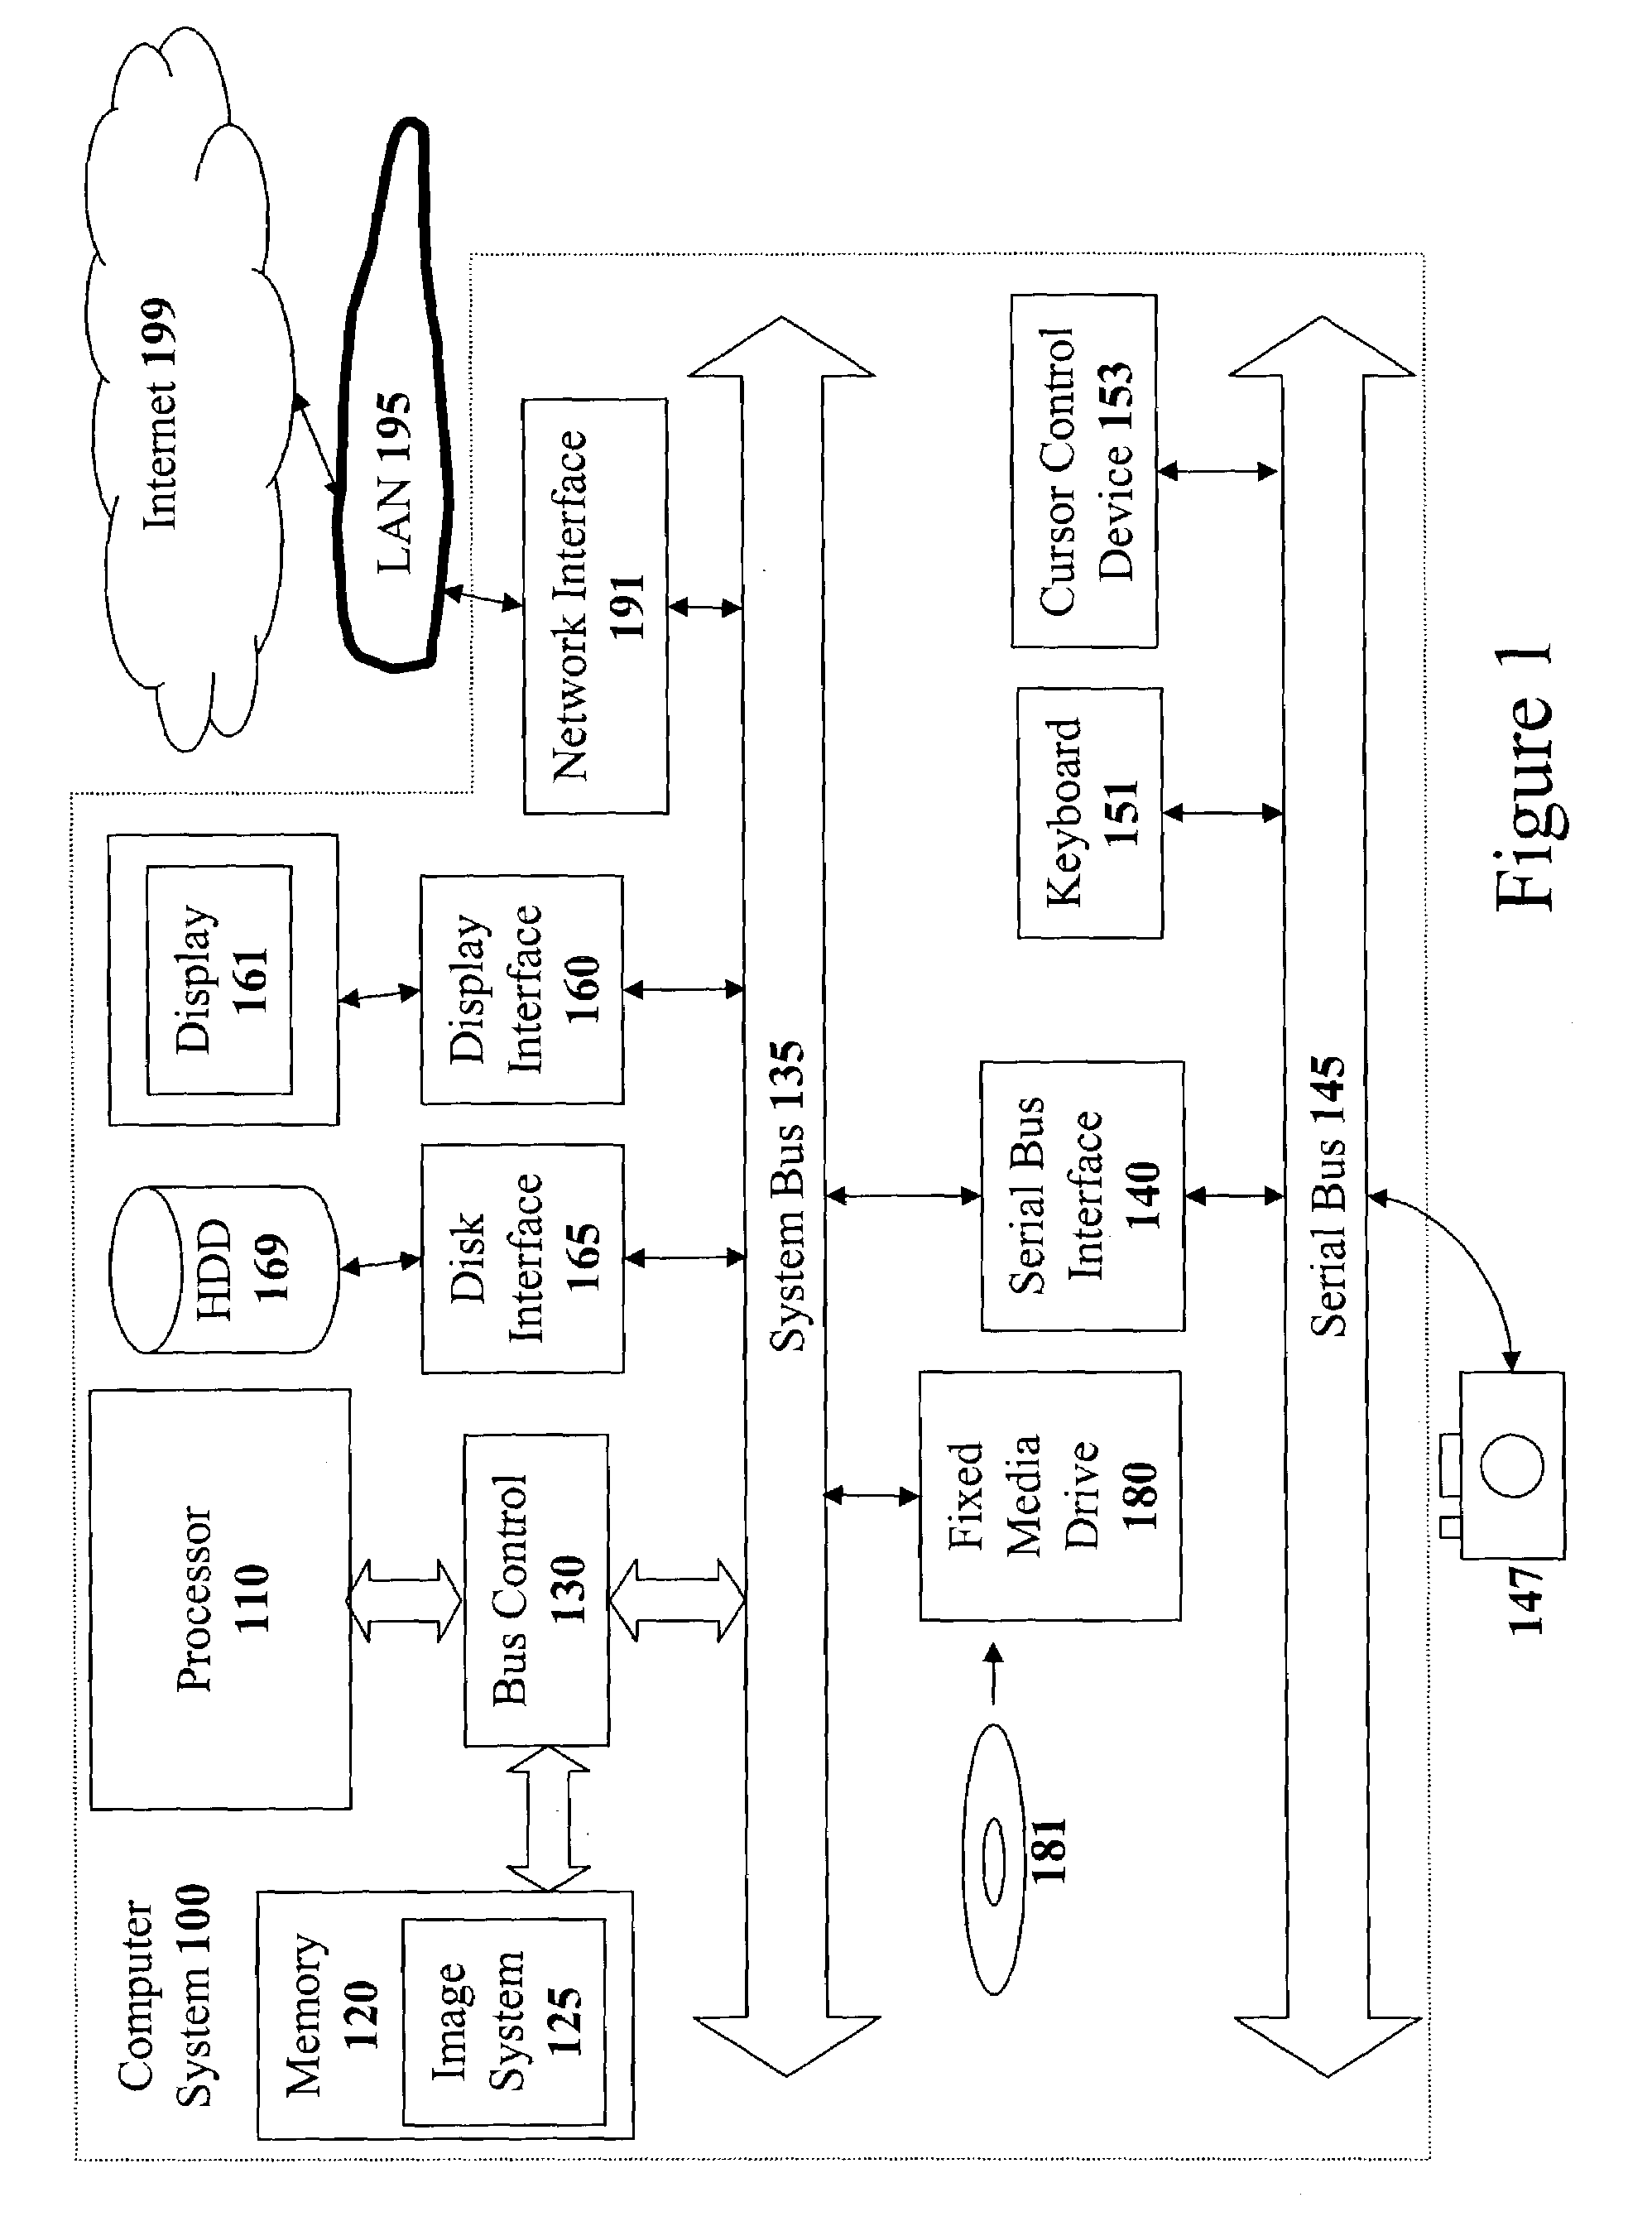 Method and apparatus for digital image manipulation to remove image blemishes